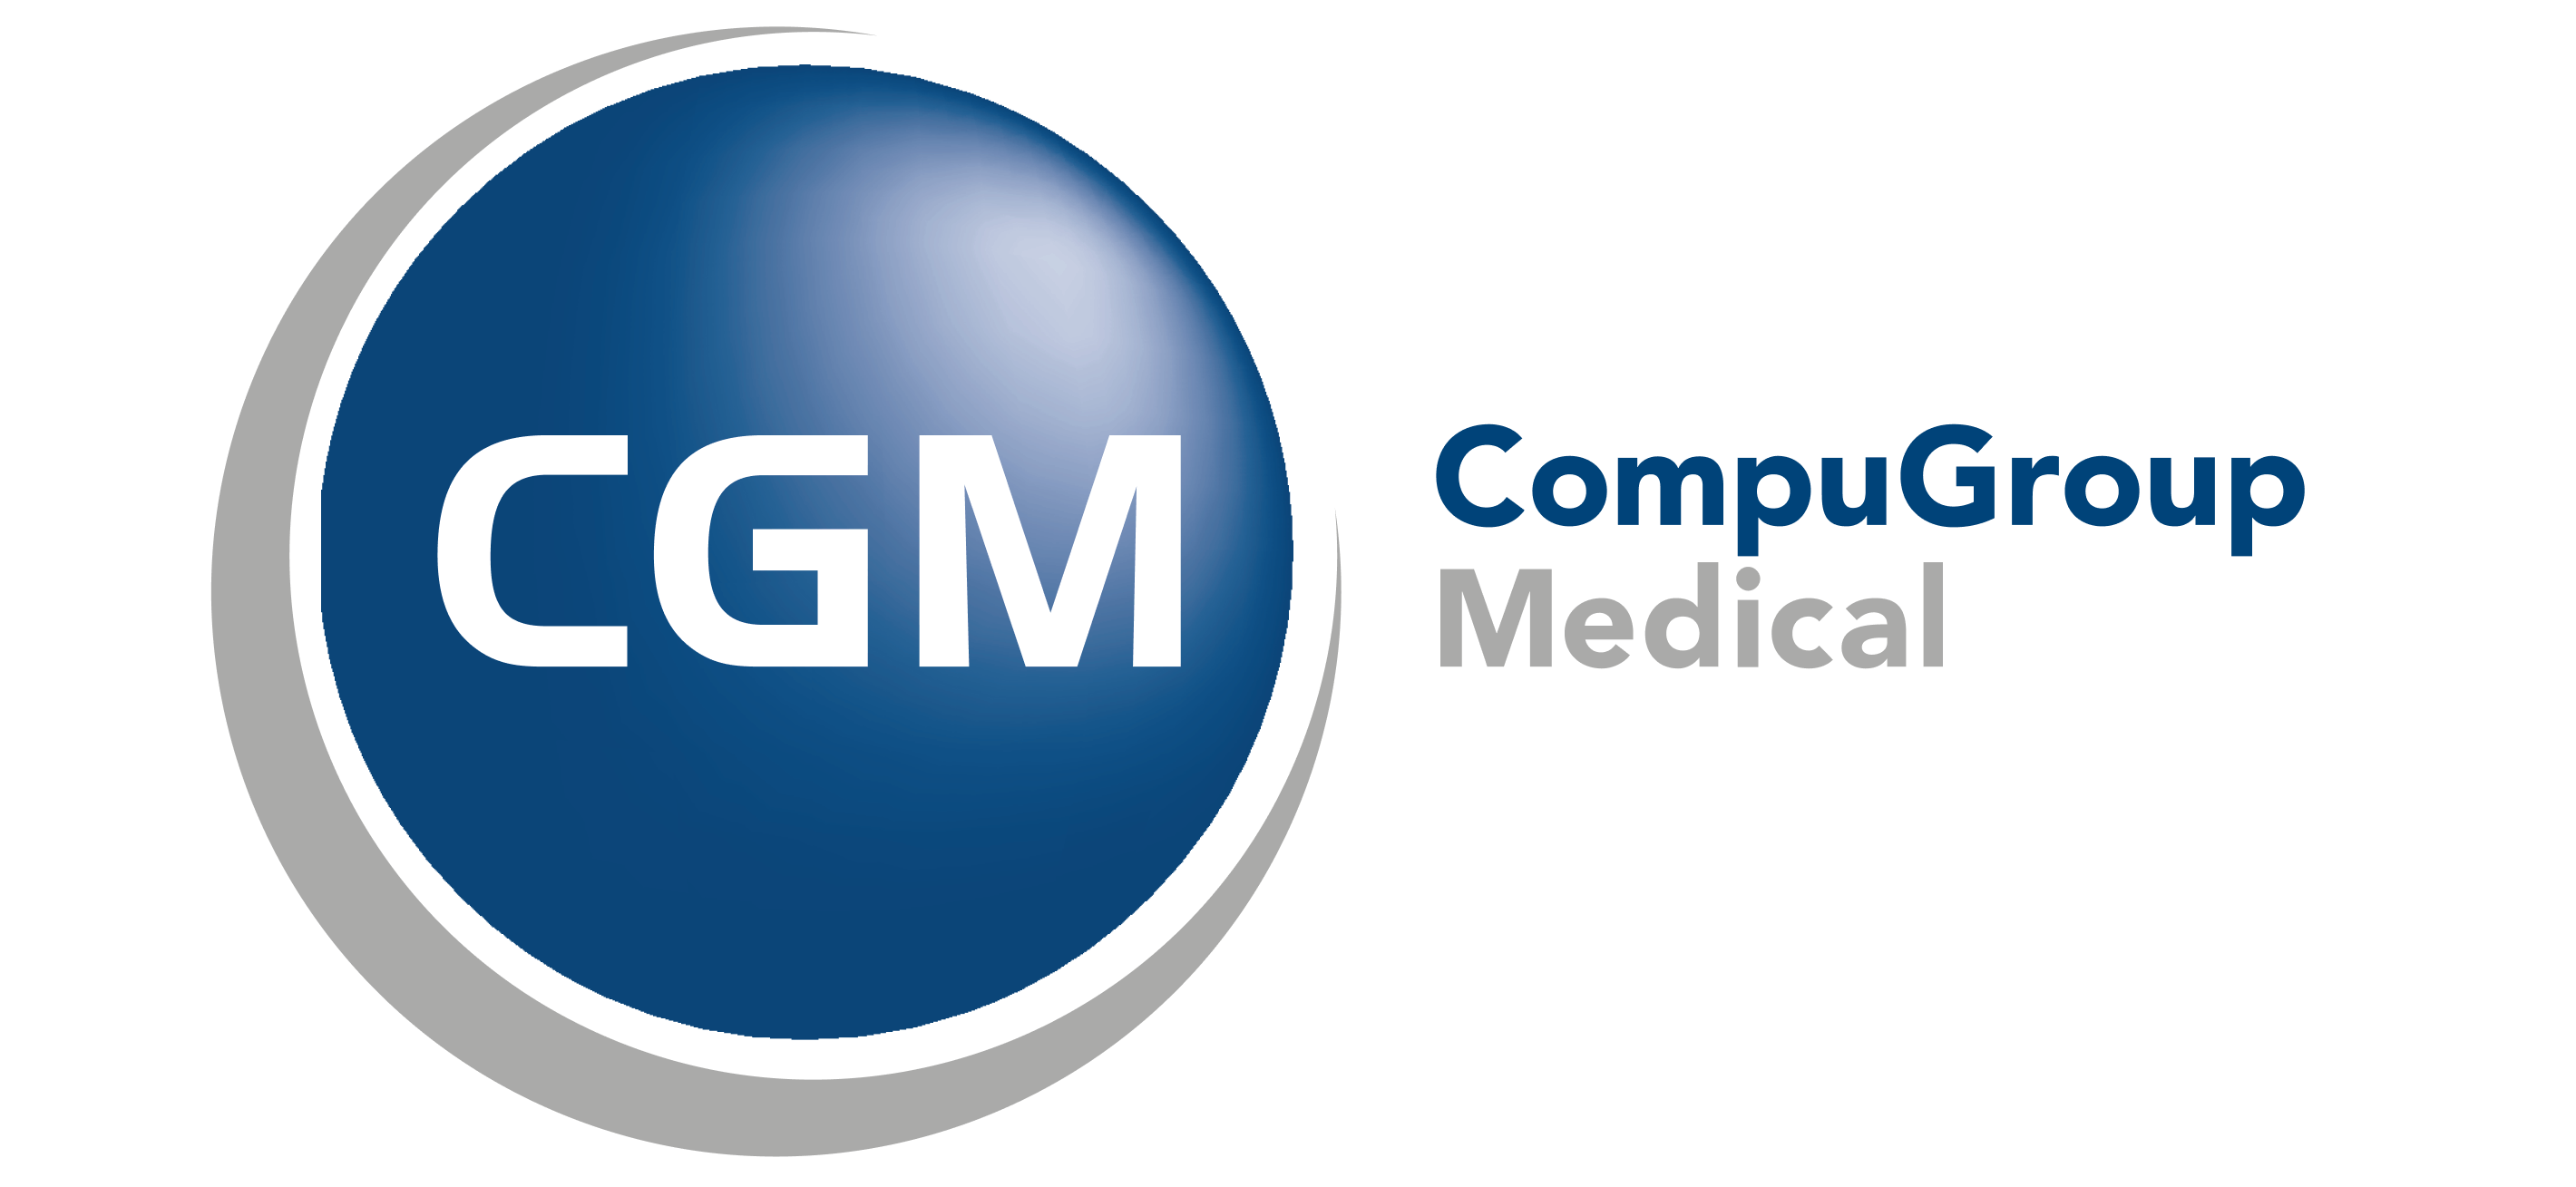 compgroup-medical